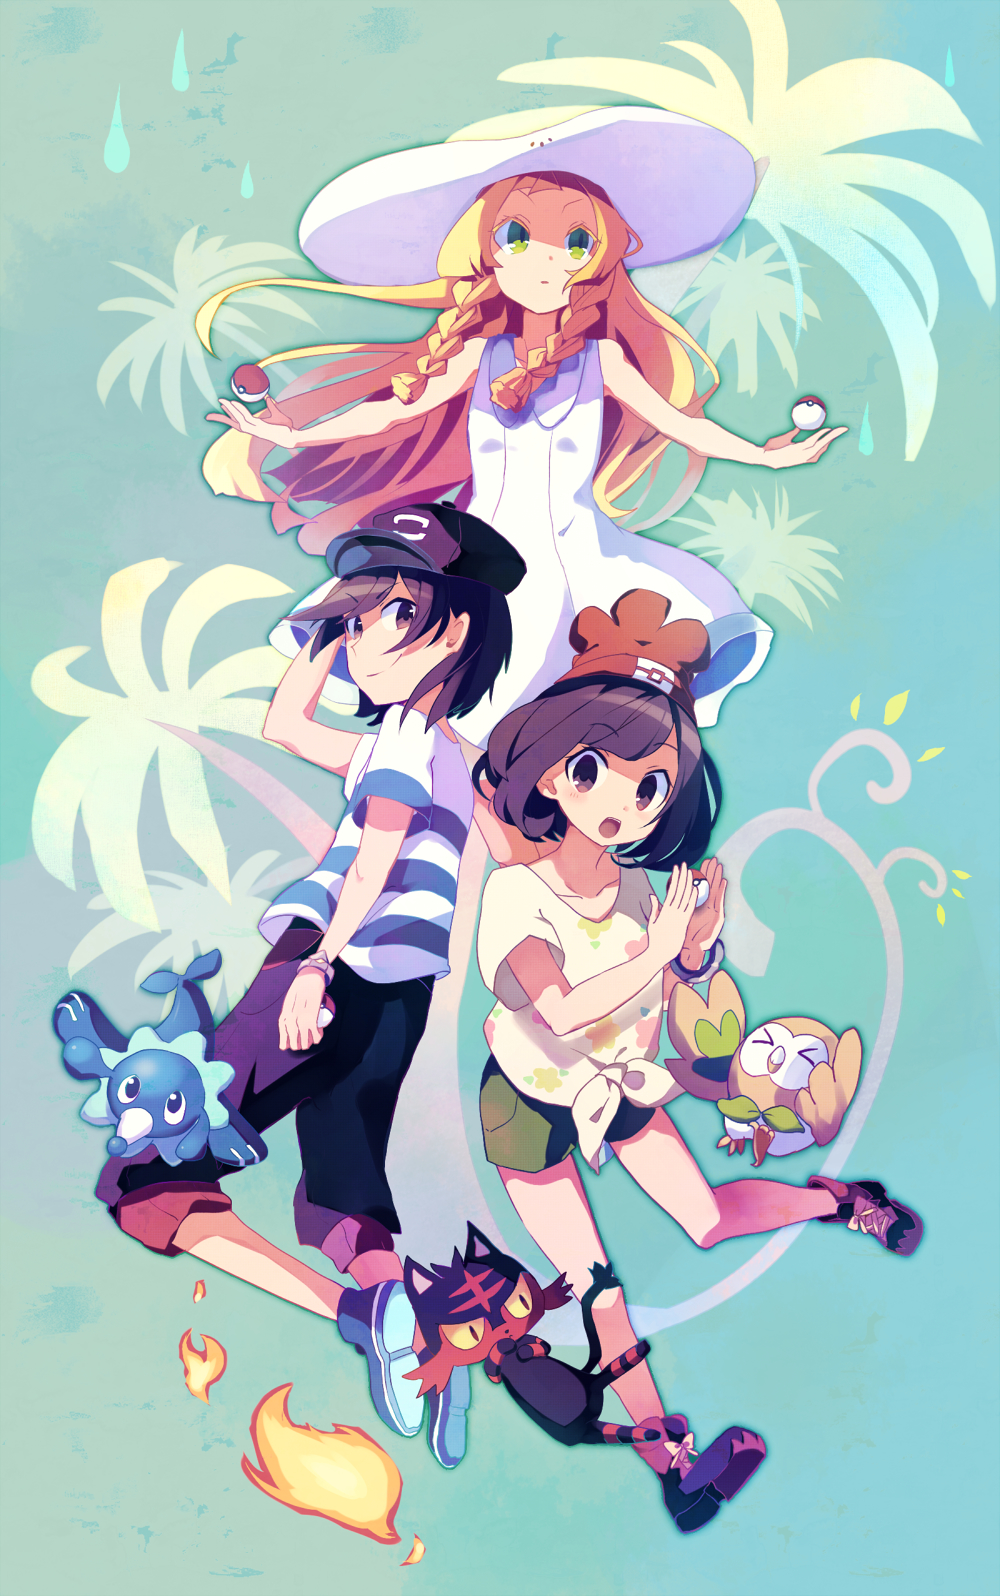 1boy 2girls artist_request blonde_hair braid brown_eyes brown_hair capri_pants dress female_protagonist_(pokemon_sm) green_eyes hat highres lillie_(pokemon) litten_(pokemon) long_hair male_protagonist_(pokemon_sm) md5_mismatch multiple_girls nyowaa417 open_mouth outstretched_arms pants poke_ball pokemon pokemon_(creature) pokemon_(game) pokemon_sm popplio rowlet shirt shoes short_hair shorts sleeveless sleeveless_dress sun_hat sundress twin_braids white_dress